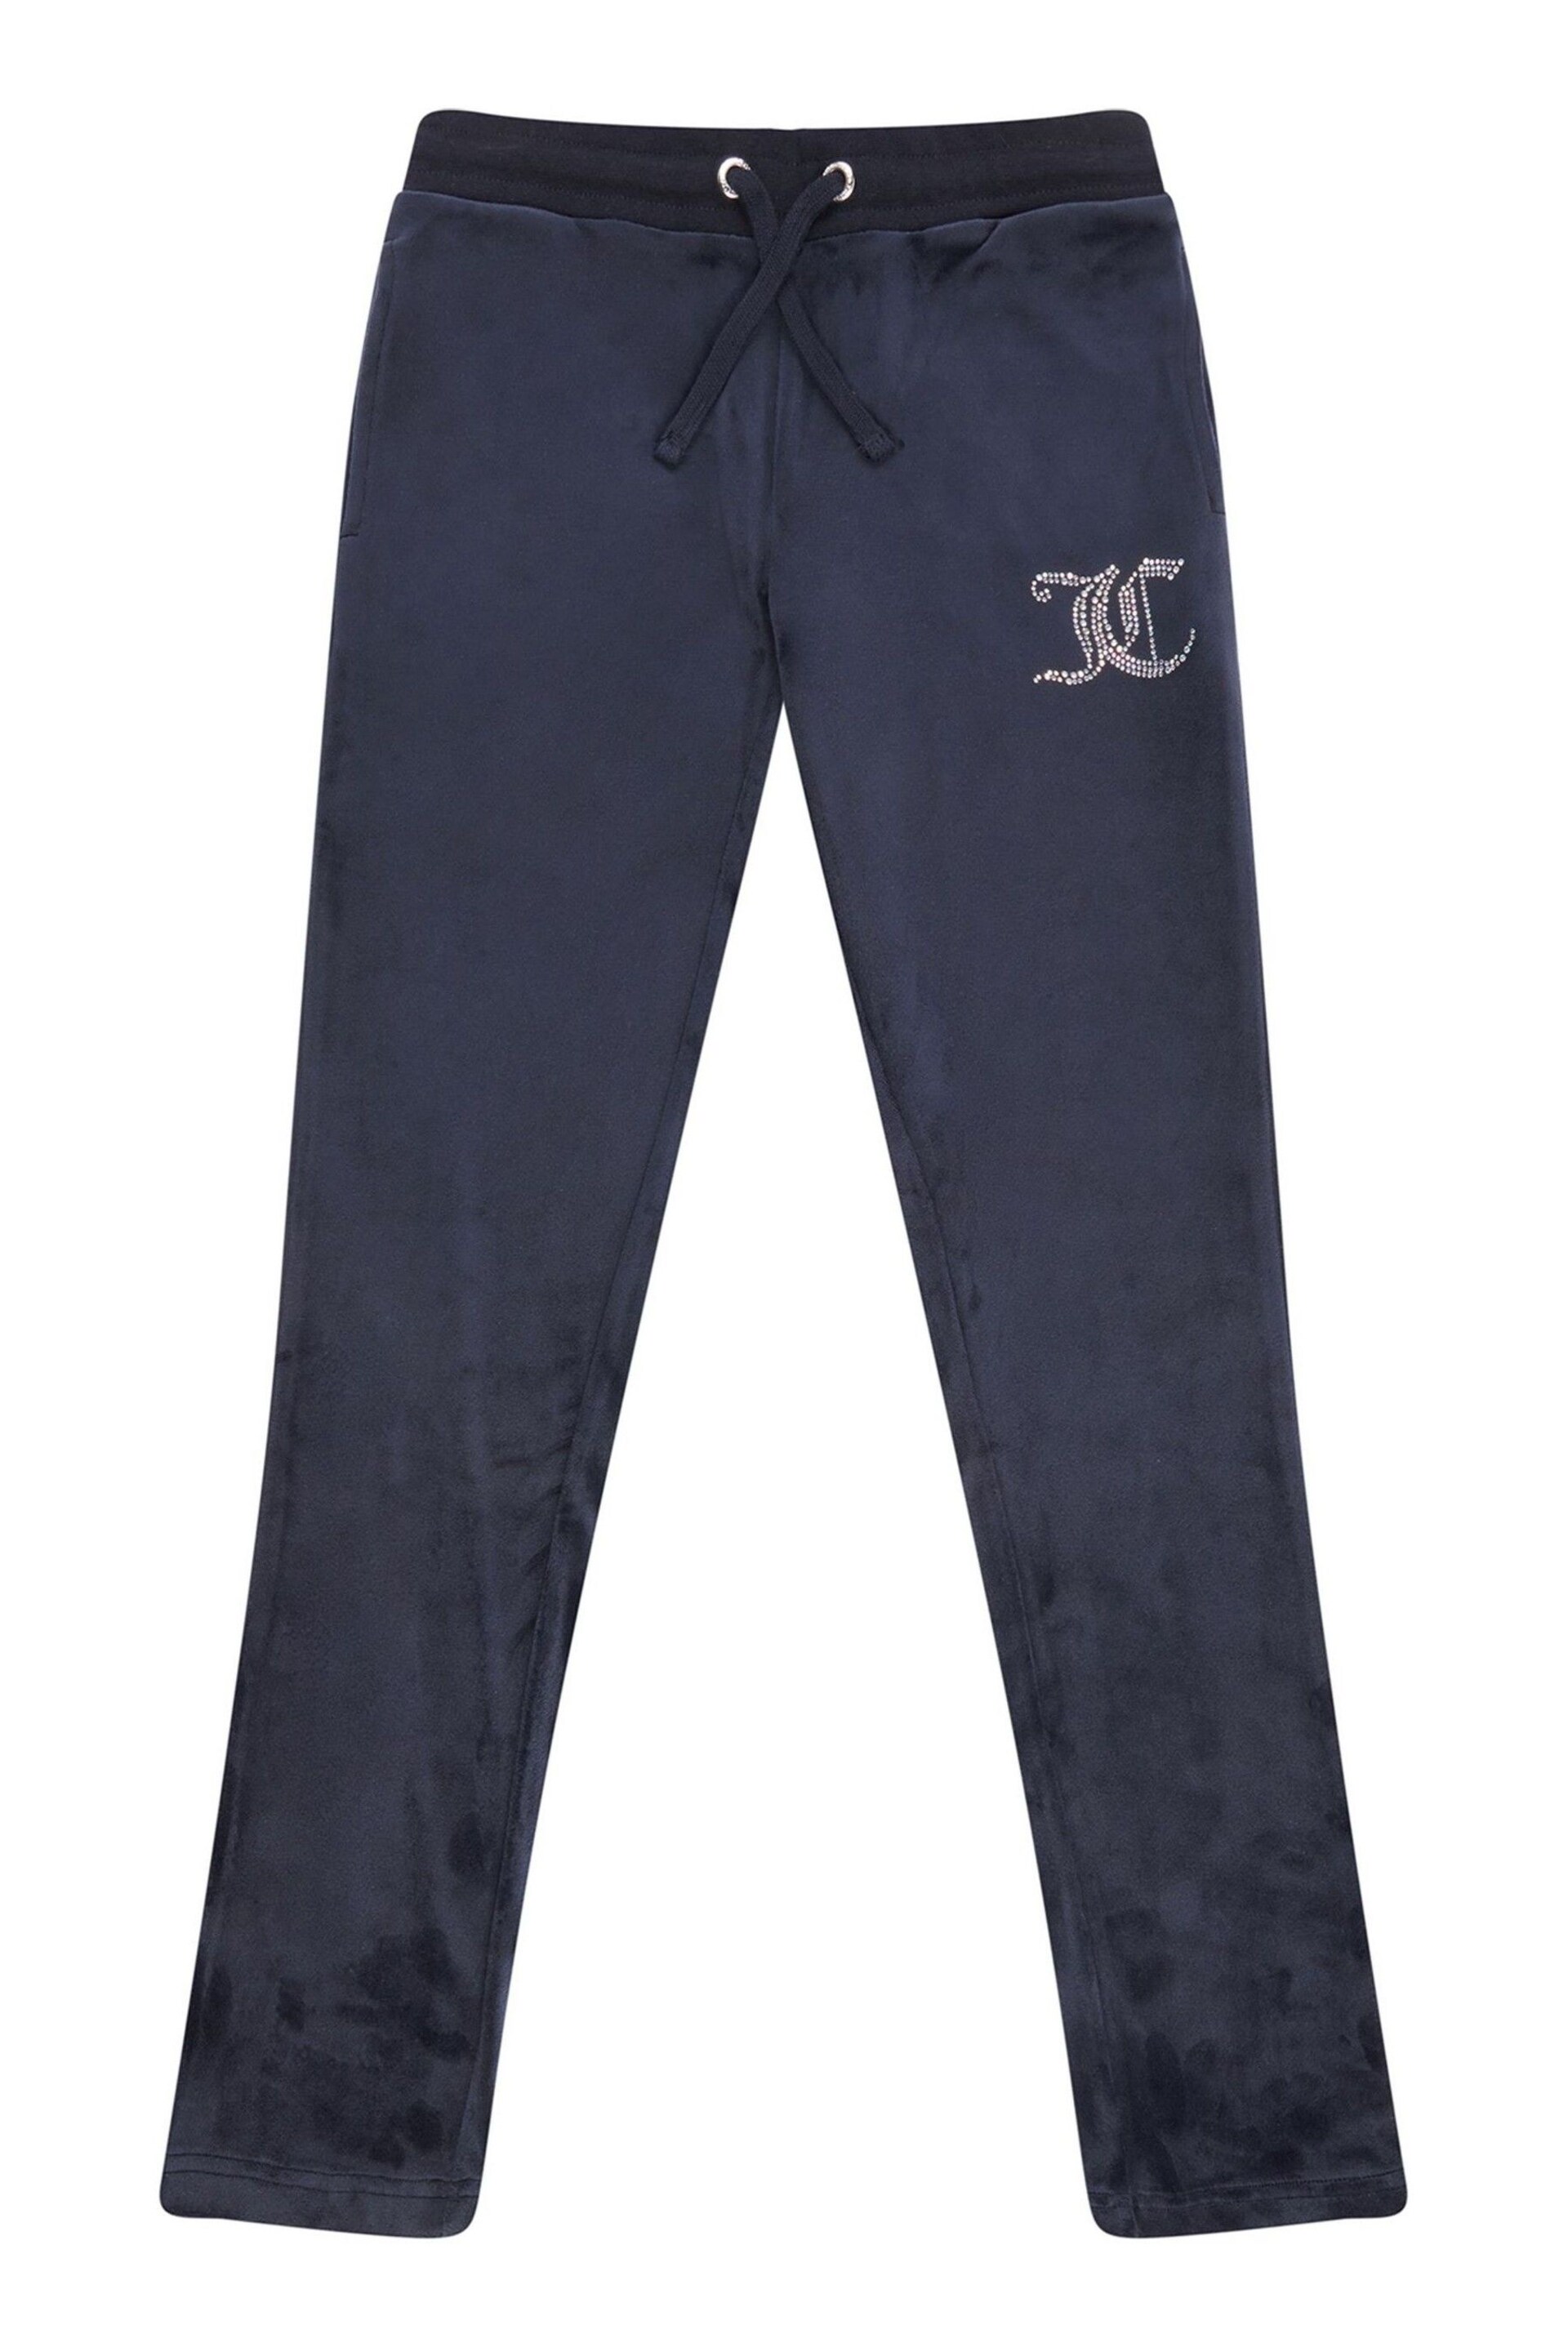 Juicy Couture Diamante Velour Bootcut Joggers - Image 1 of 3